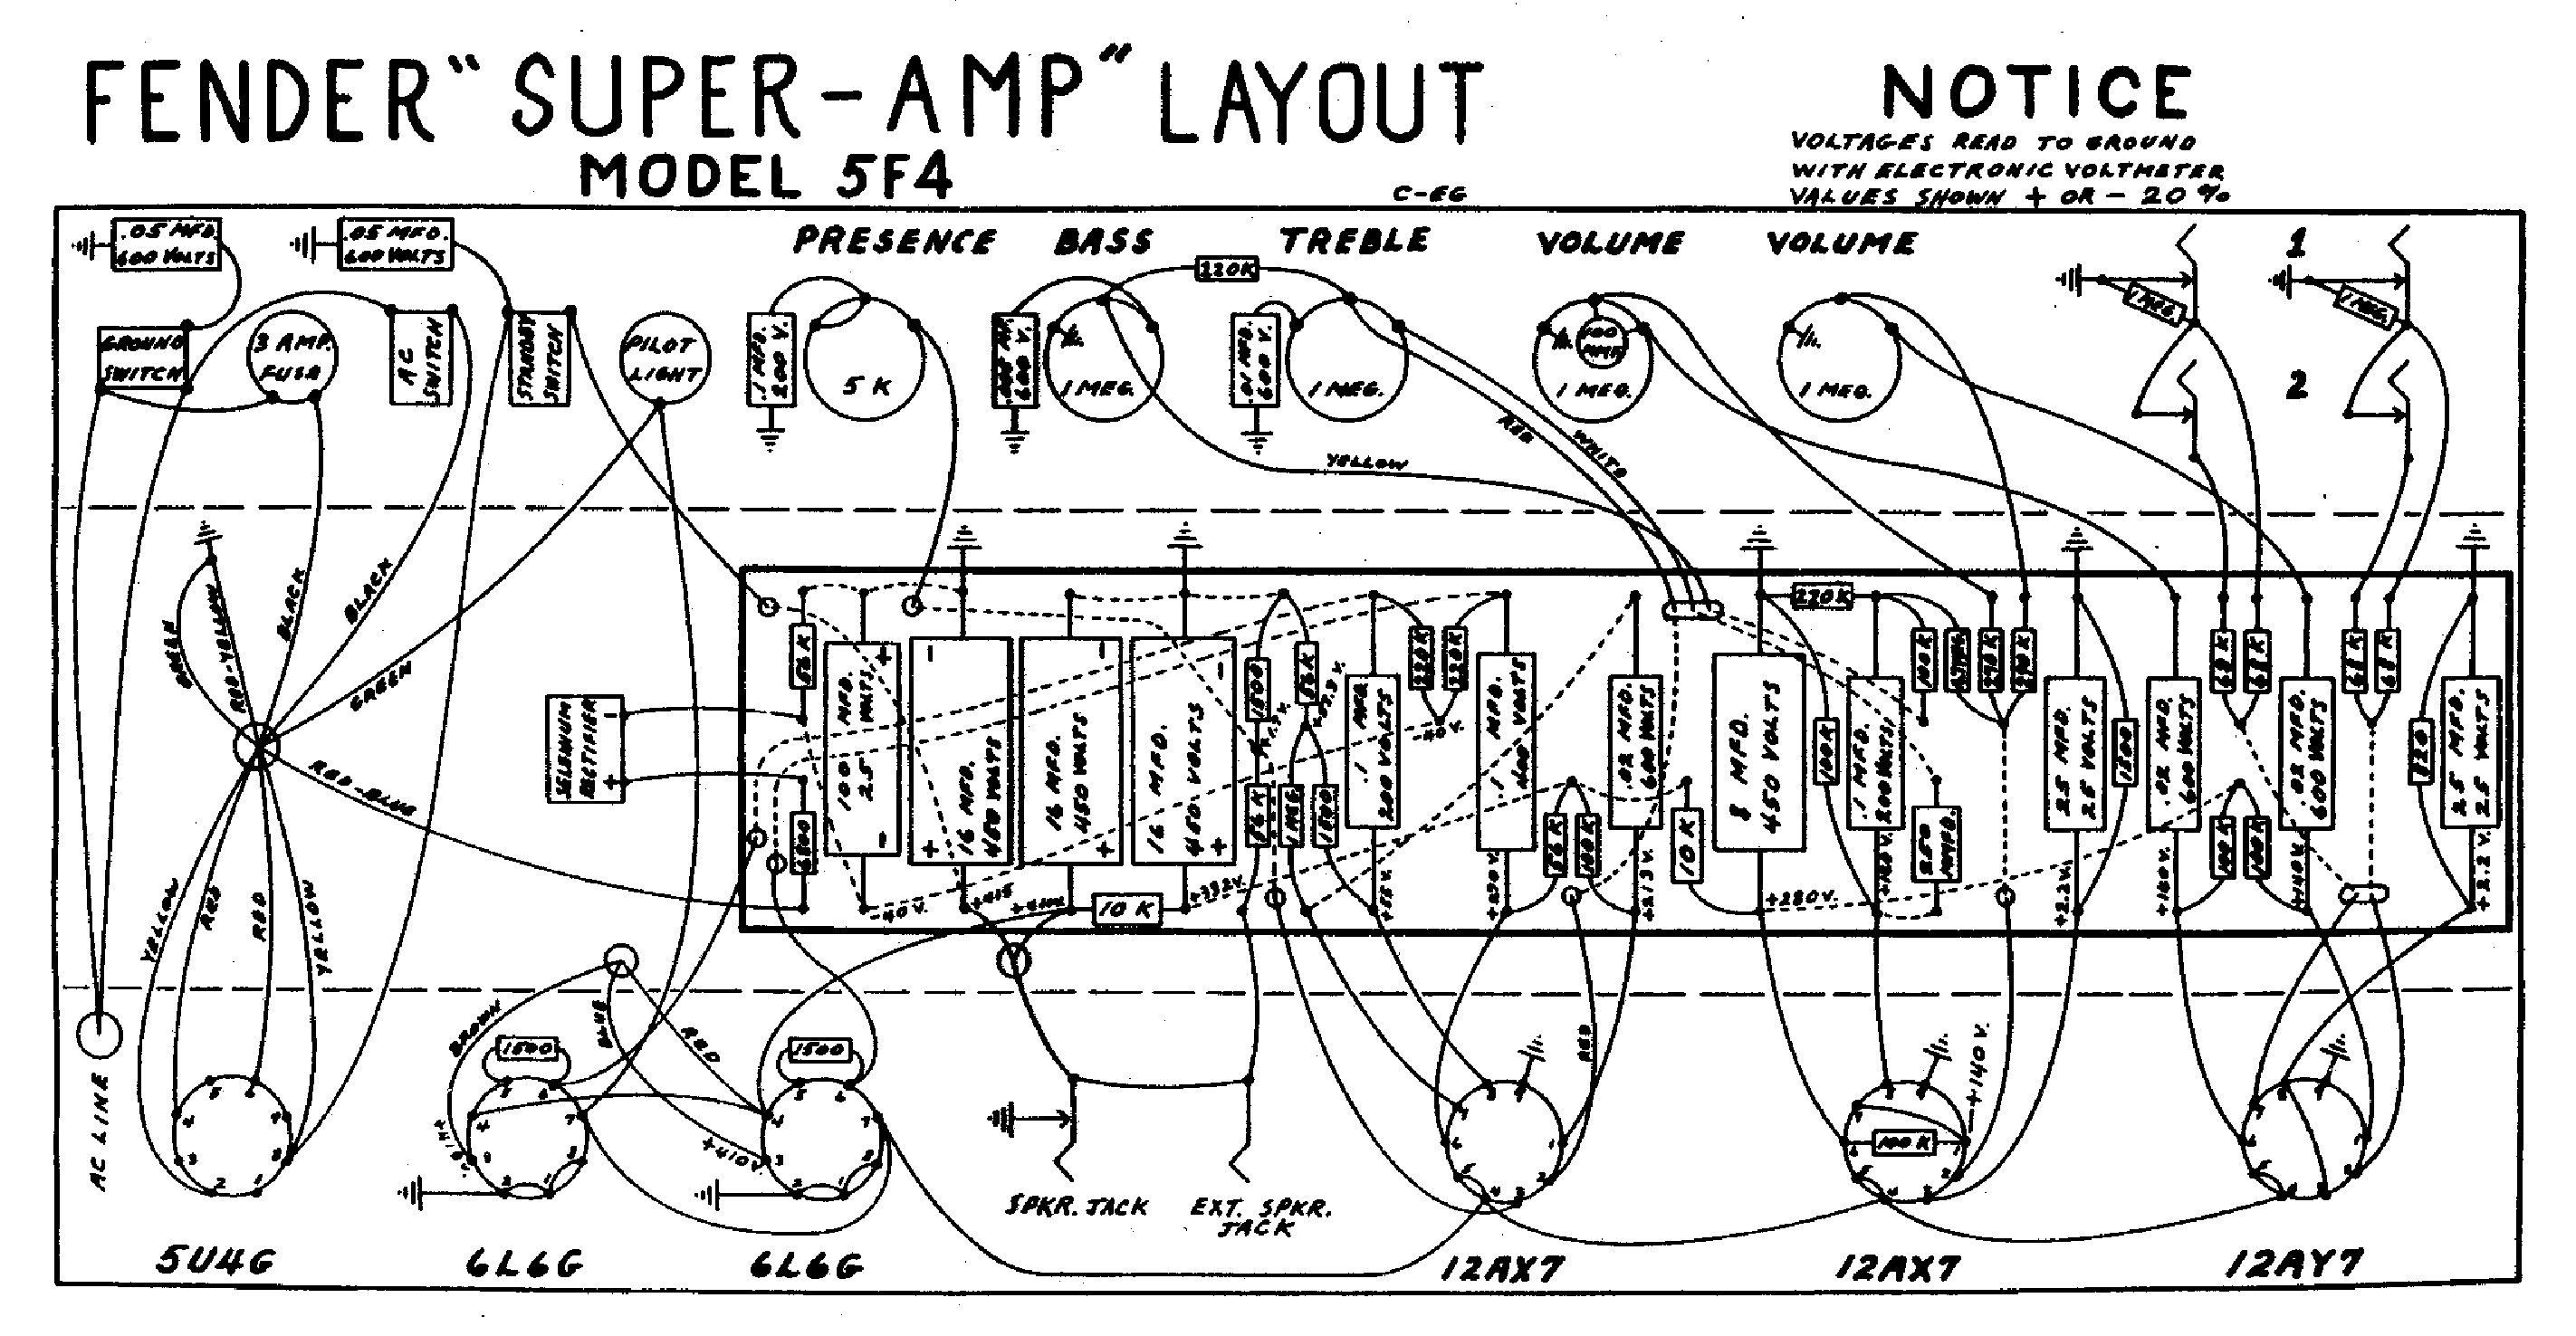 FENDER SUPER-AMP-5F4-LAYOUT service manual (1st page)